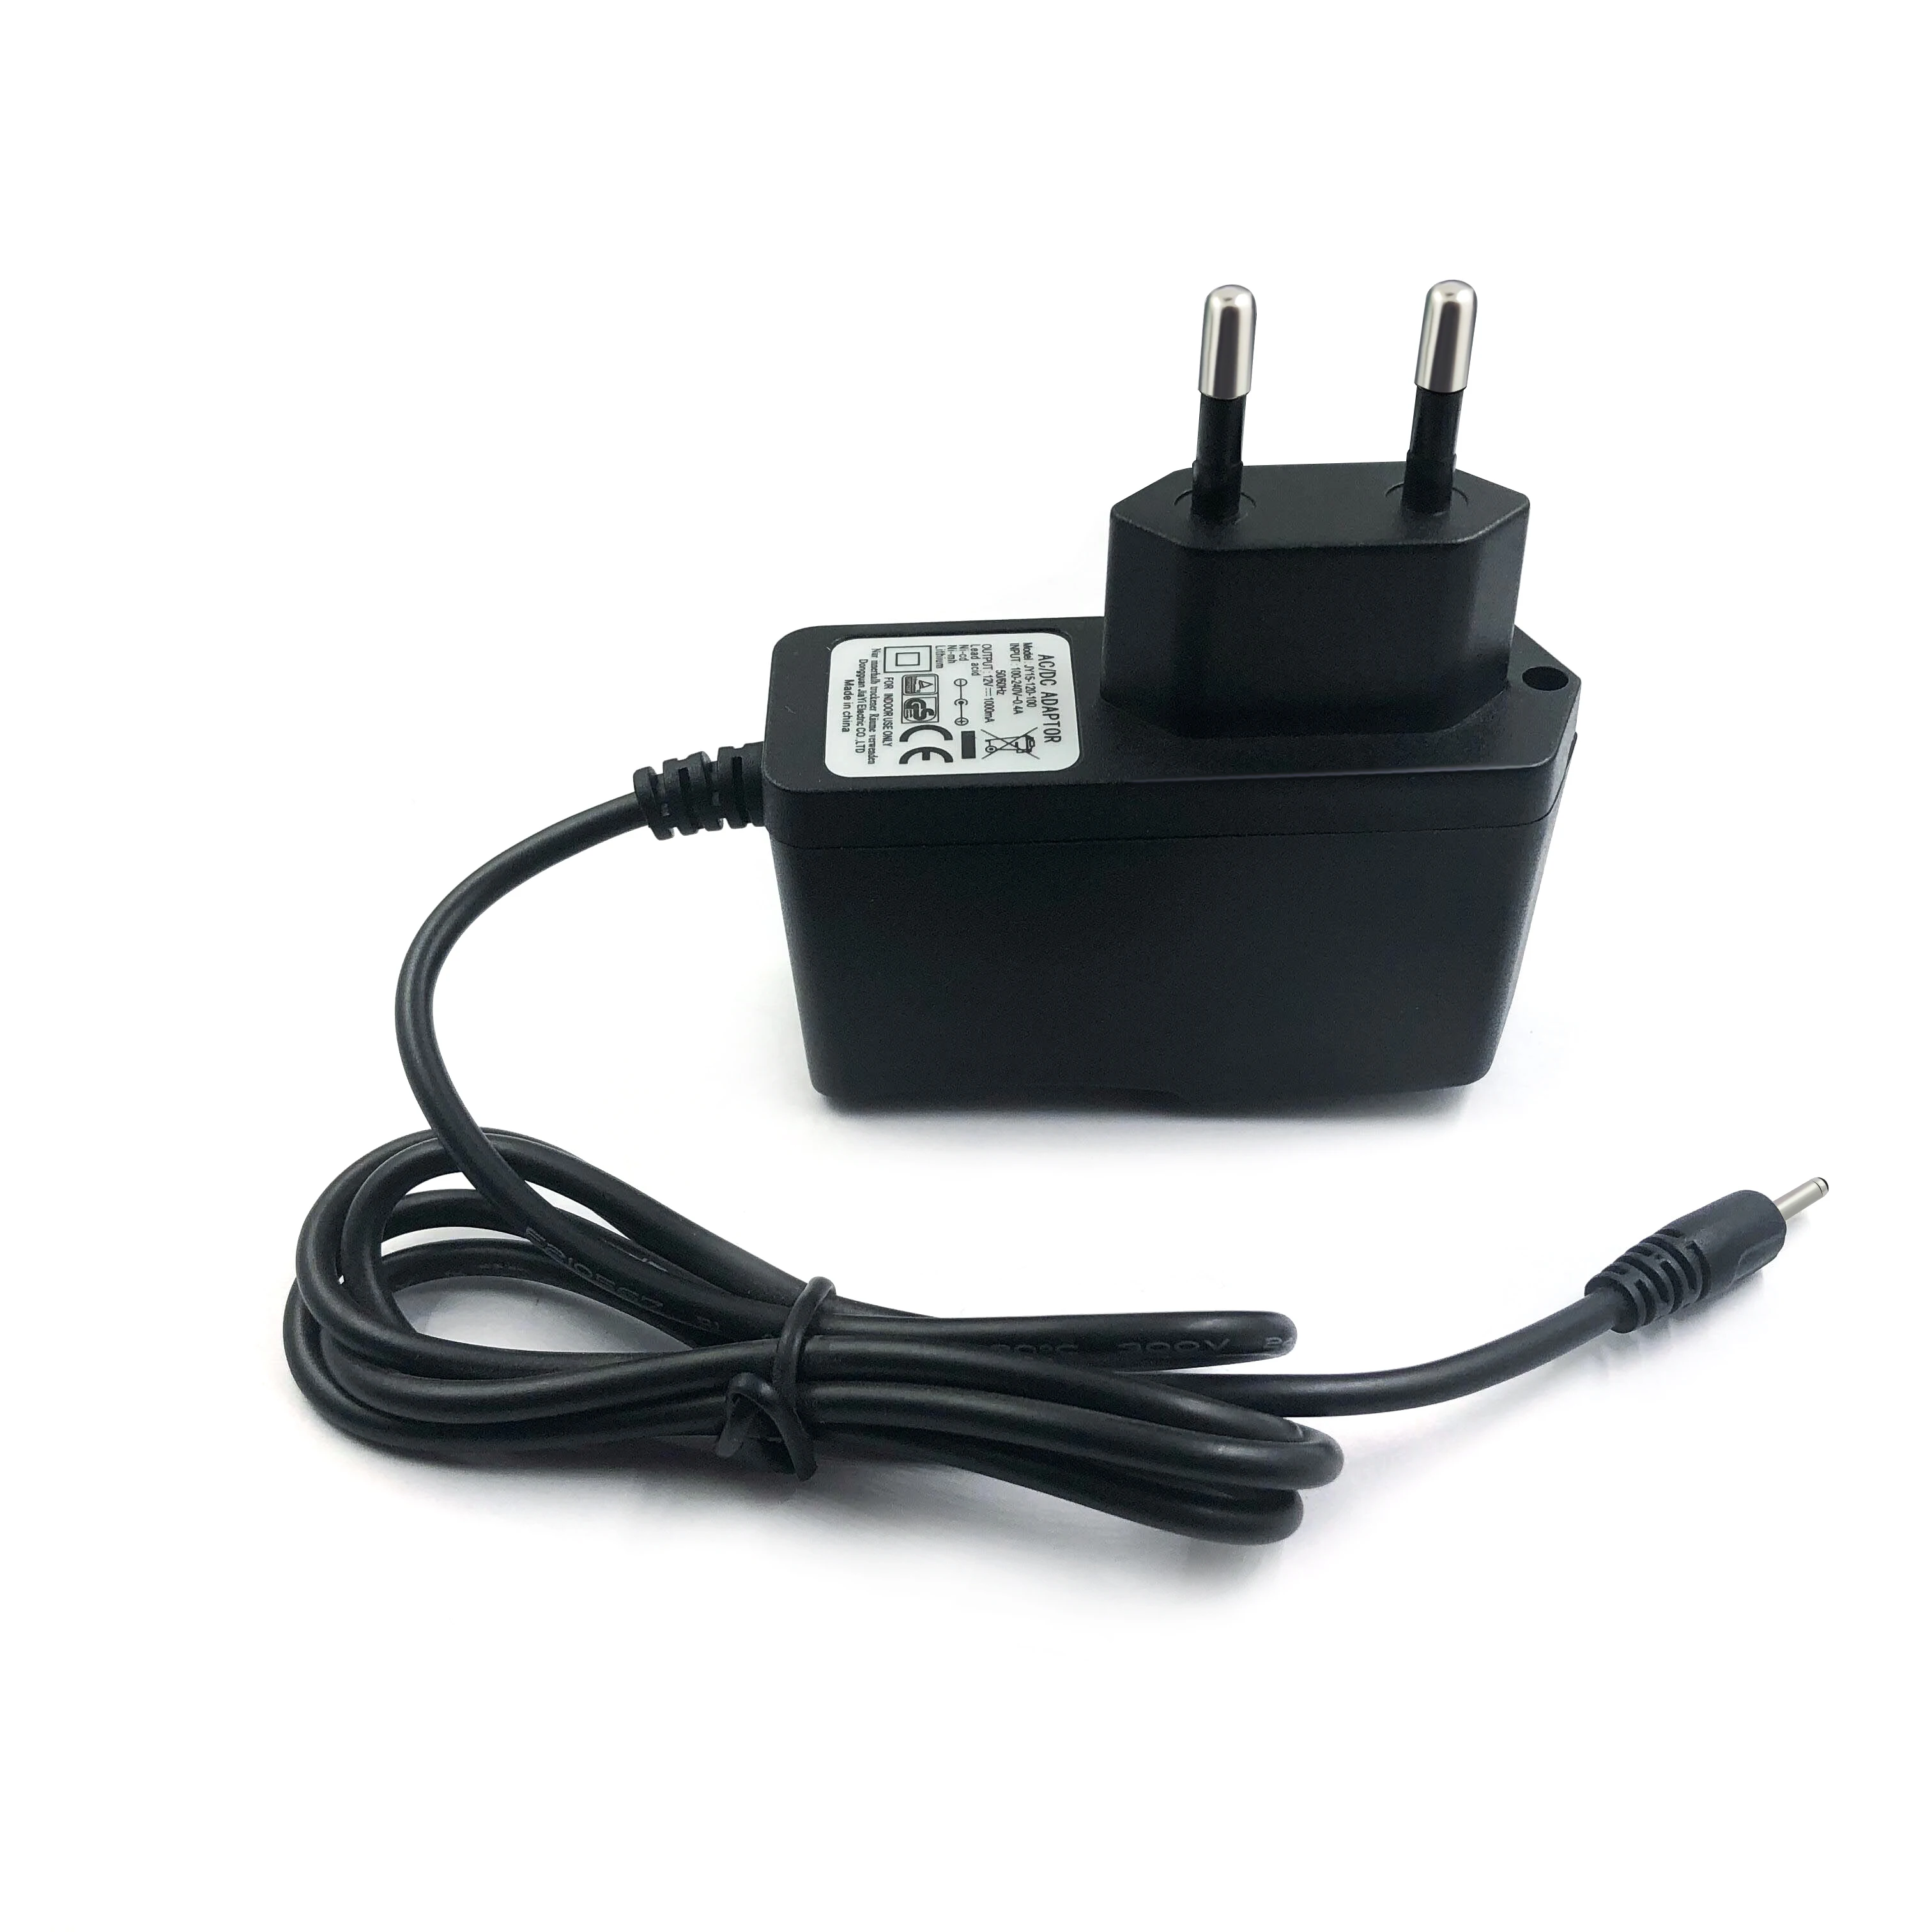 Buy Ac Dc 5v 1a 1000ma Usb-c Wall Power Adapter Charger & Pse Certification  from Shenzhen Lvxiang Technology Co., Ltd., China